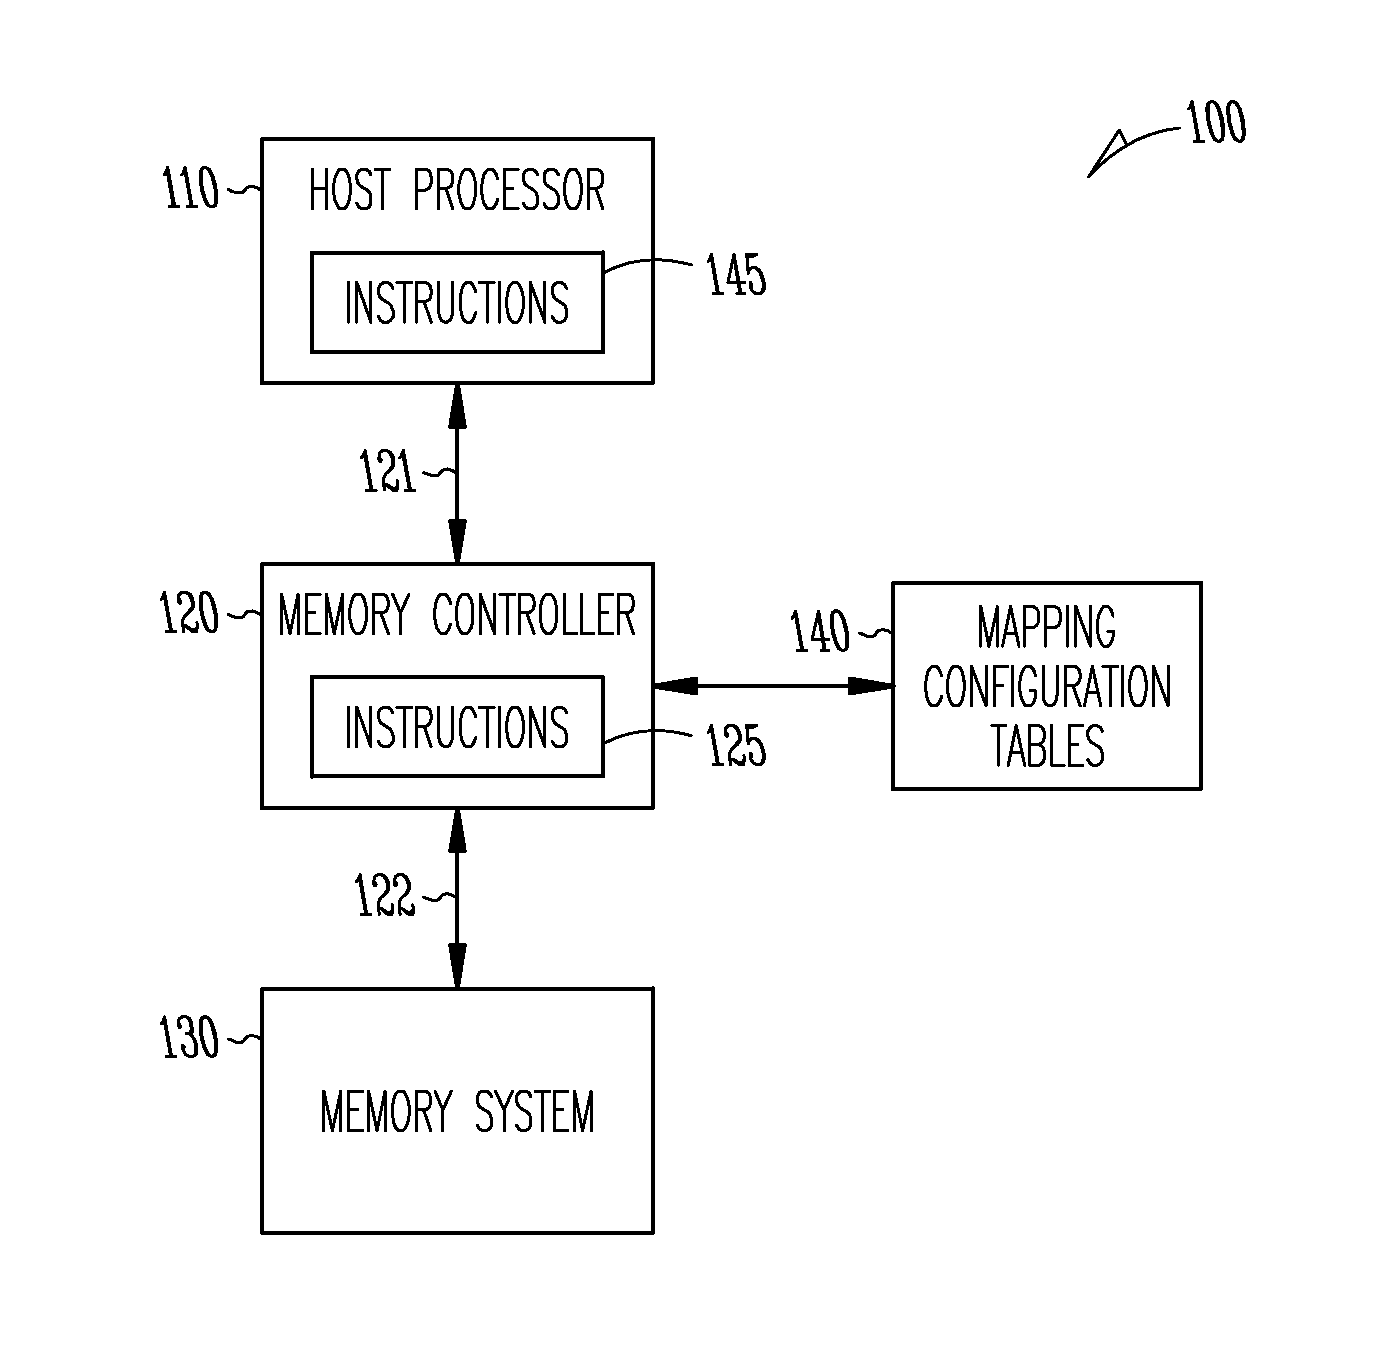 Systems and methods for memory system management based on thermal information of a memory system